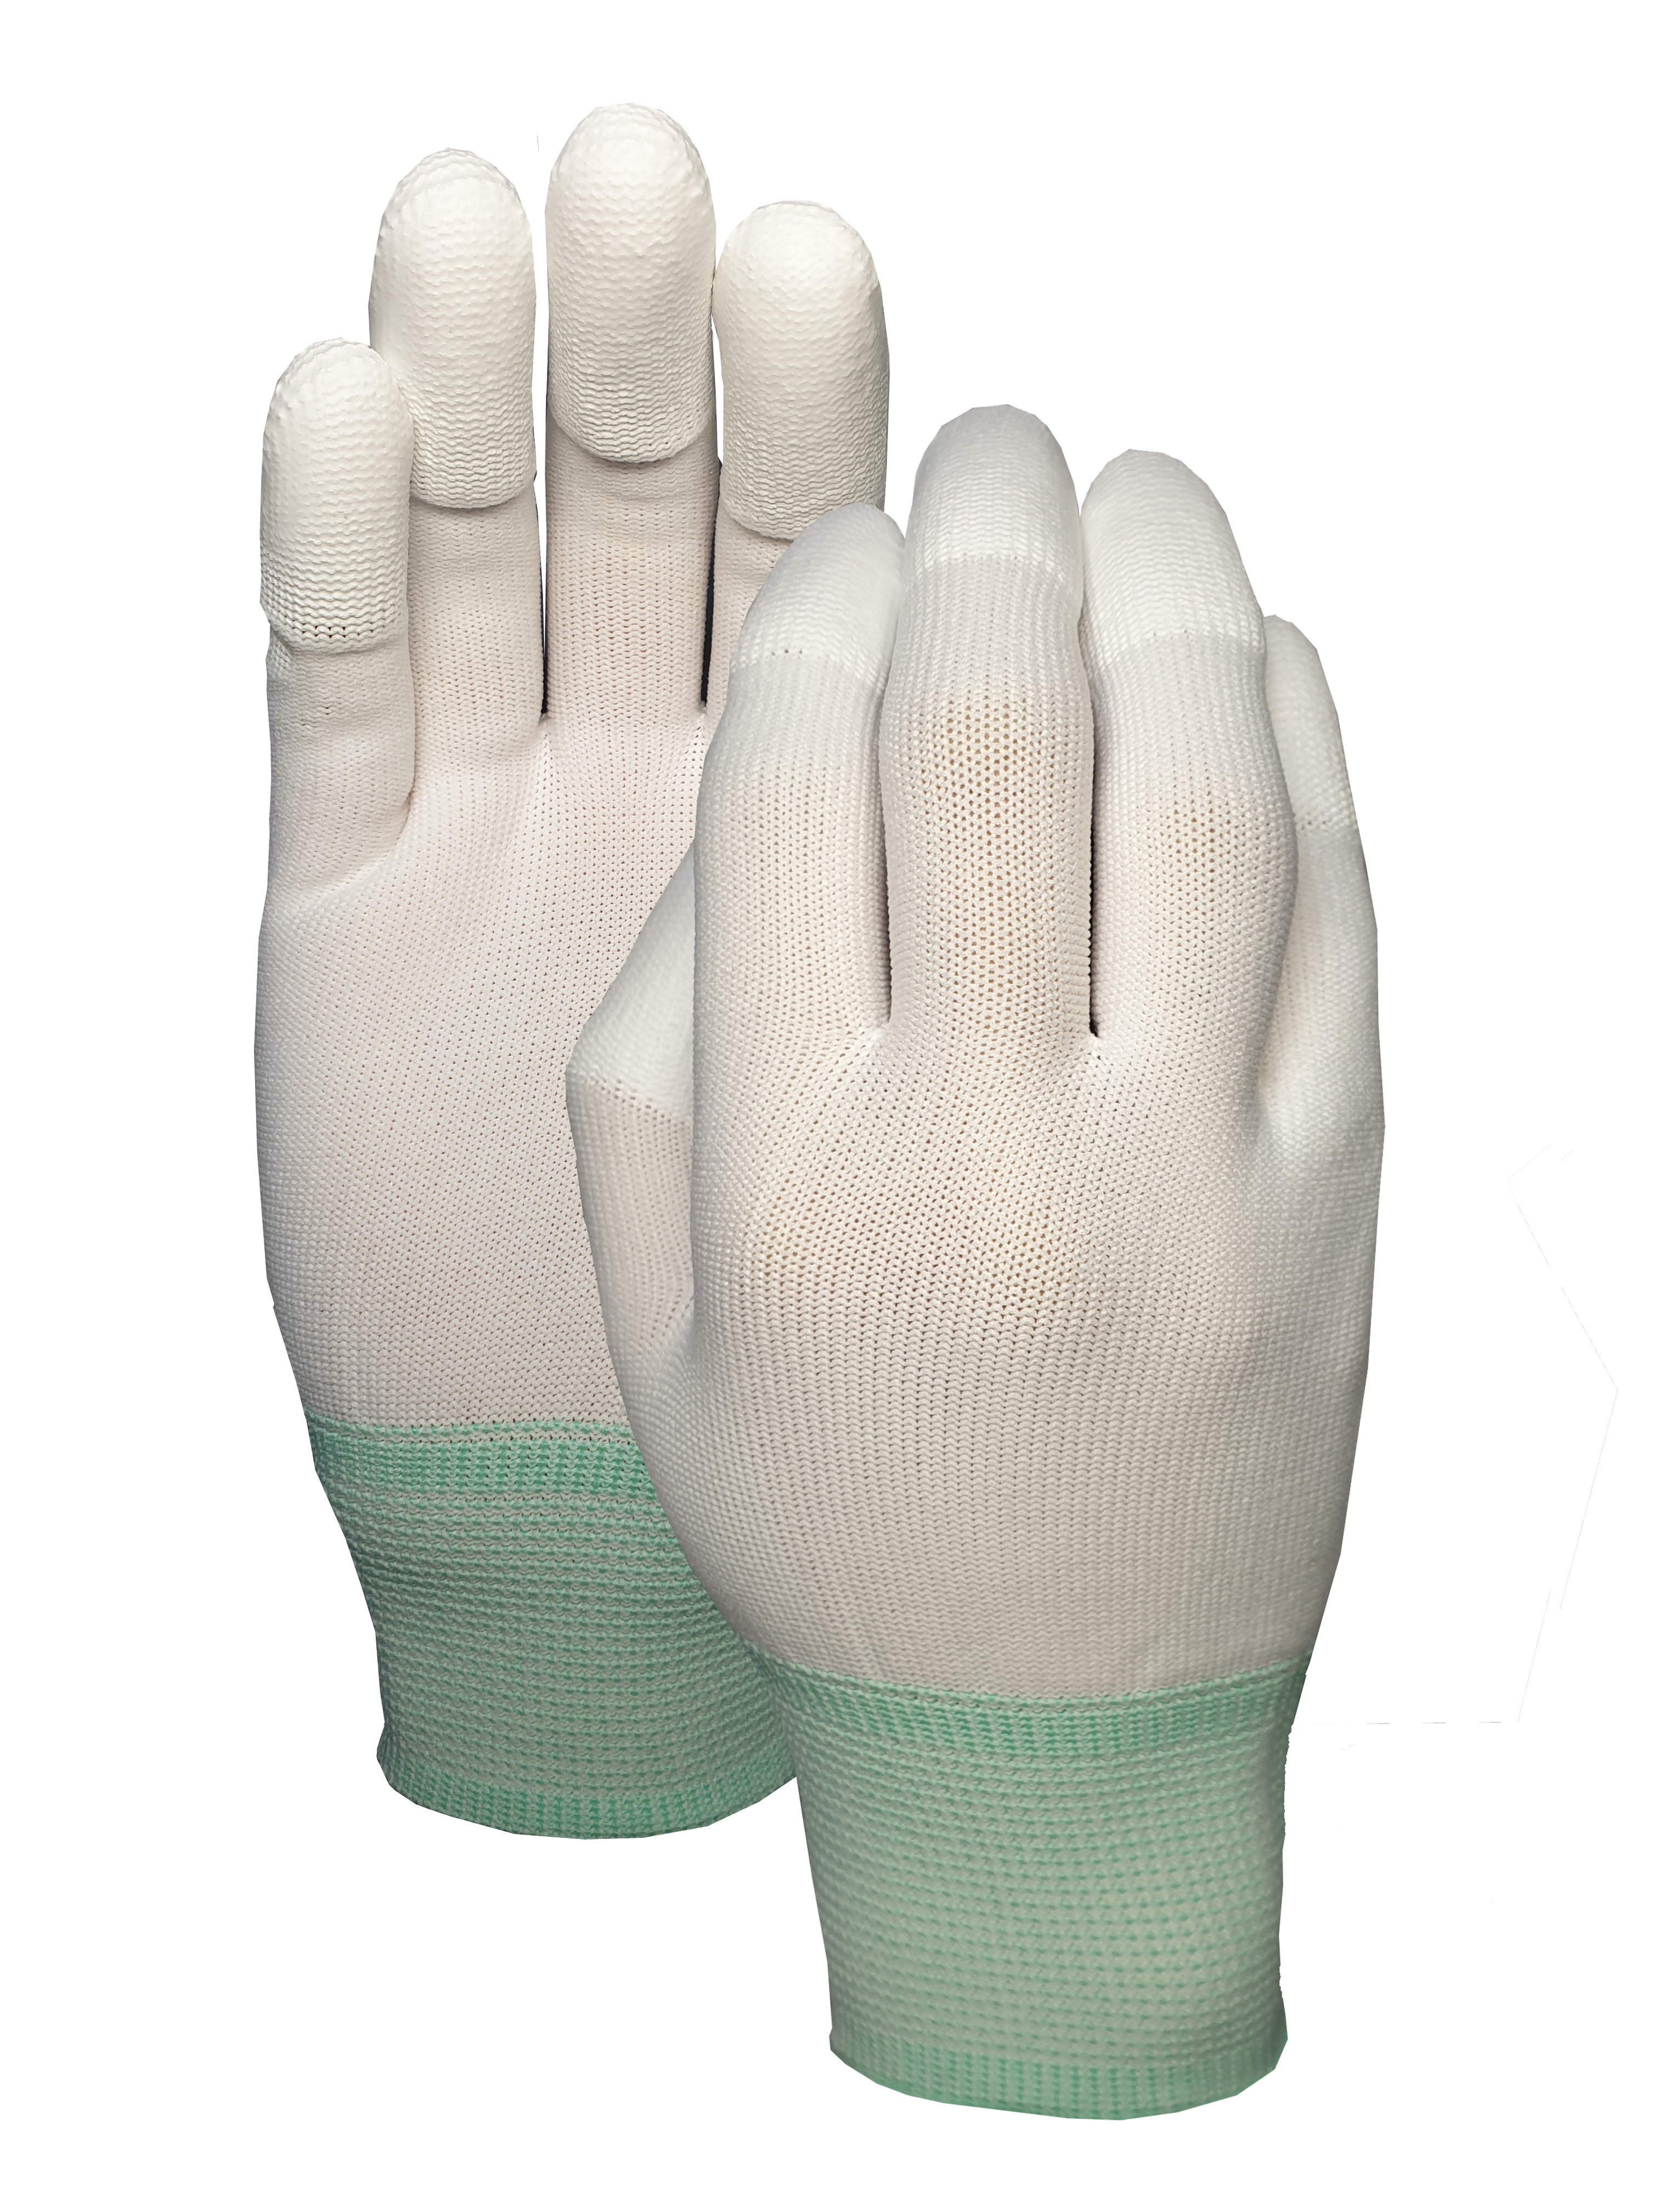 Nylon with PU finger top Glove